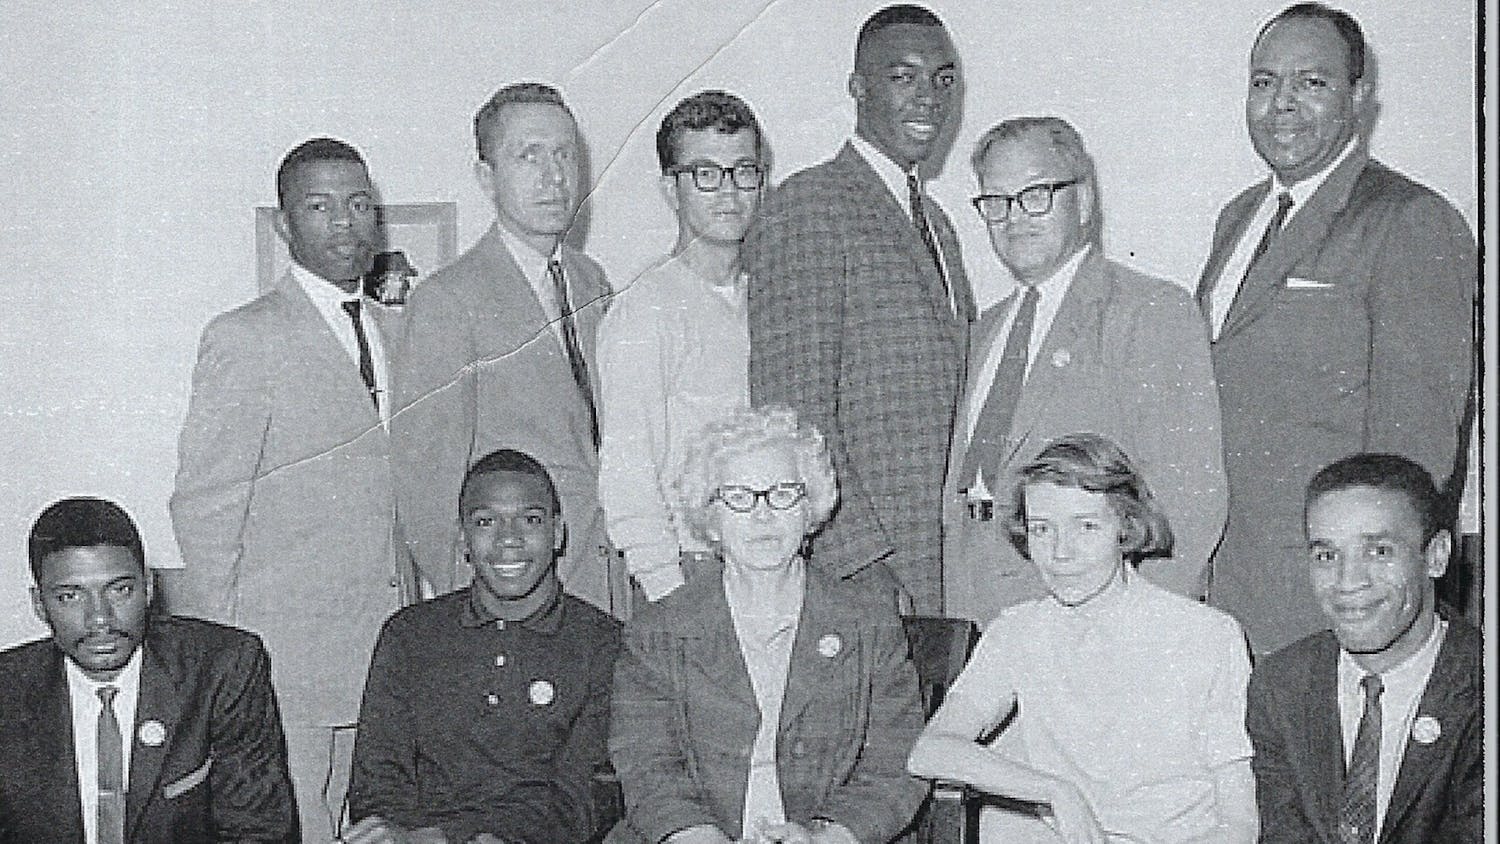 Charles Pearson and other Freedom Riders completed a training in Washington, D.C., before going on the Freedom Rides. This training was to ensure that no matter what happened during the protests, the Freedom Riders would remain non-violent.
